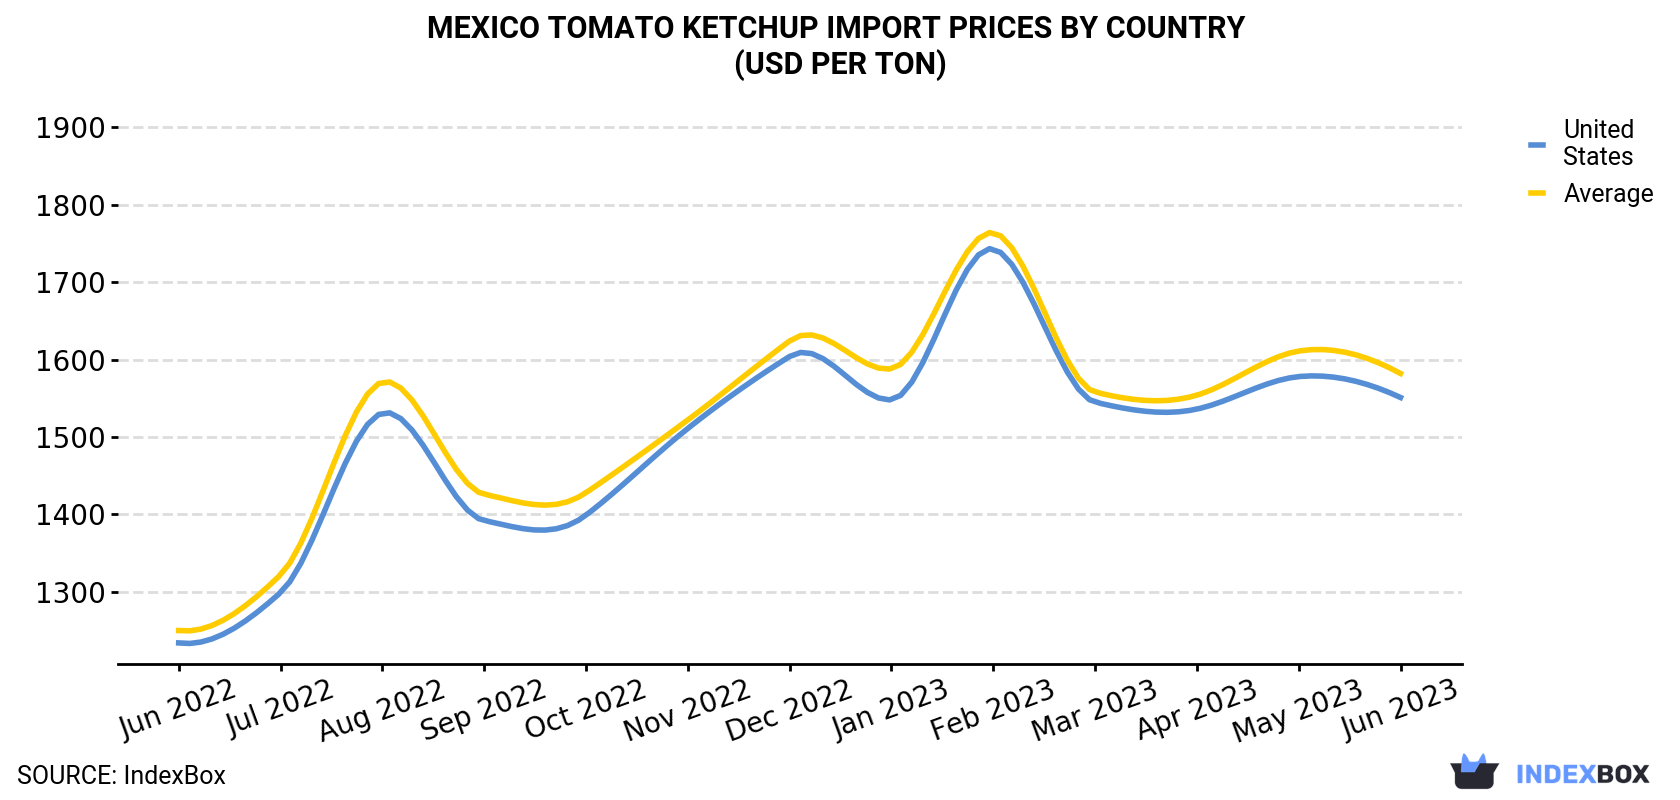 Mexico Tomato Ketchup Import Prices By Country (USD Per Ton)